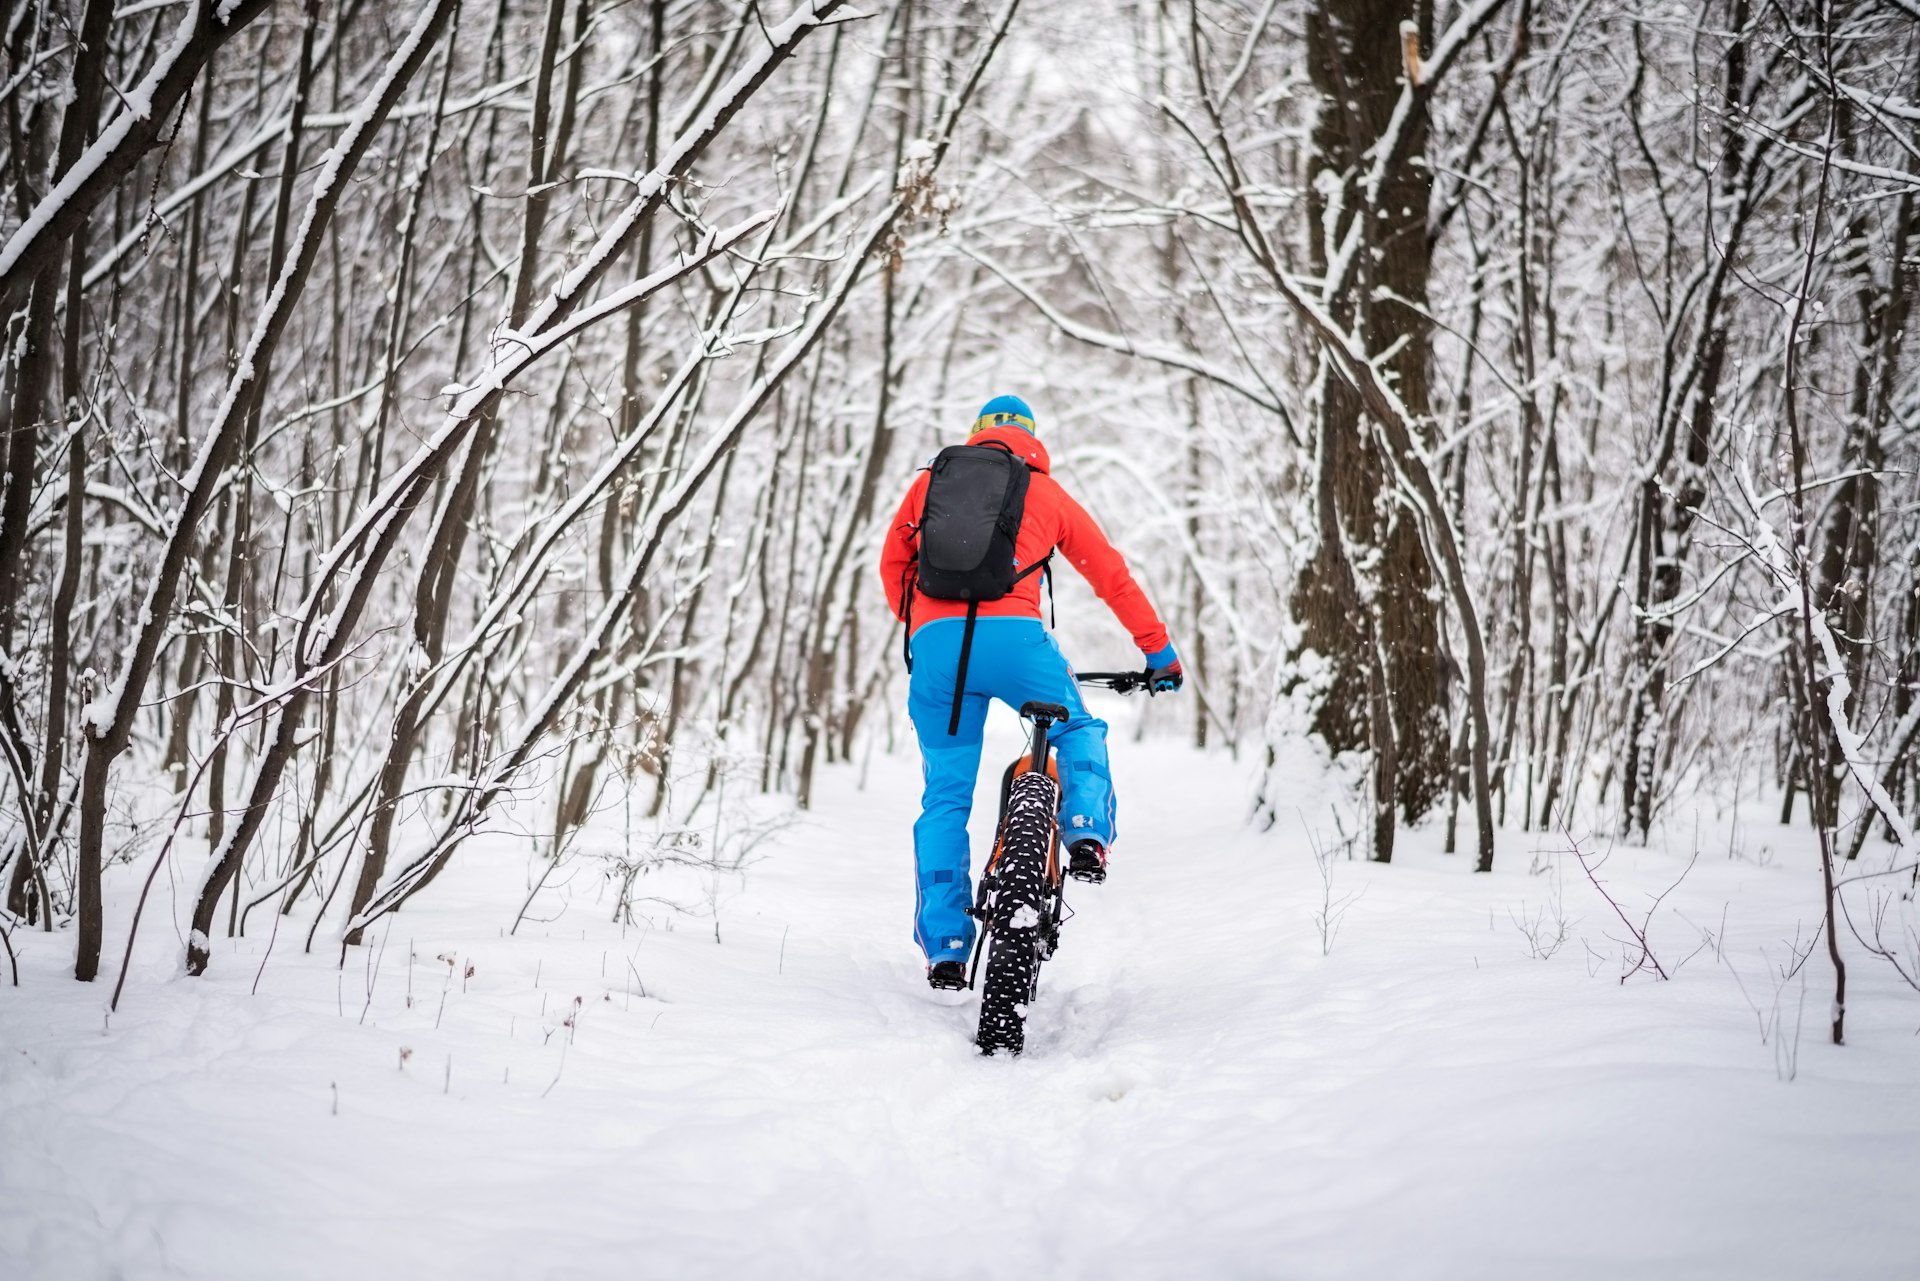 A man, seen from behind, rides a fat-tire bike through a snowy forest on a winter day